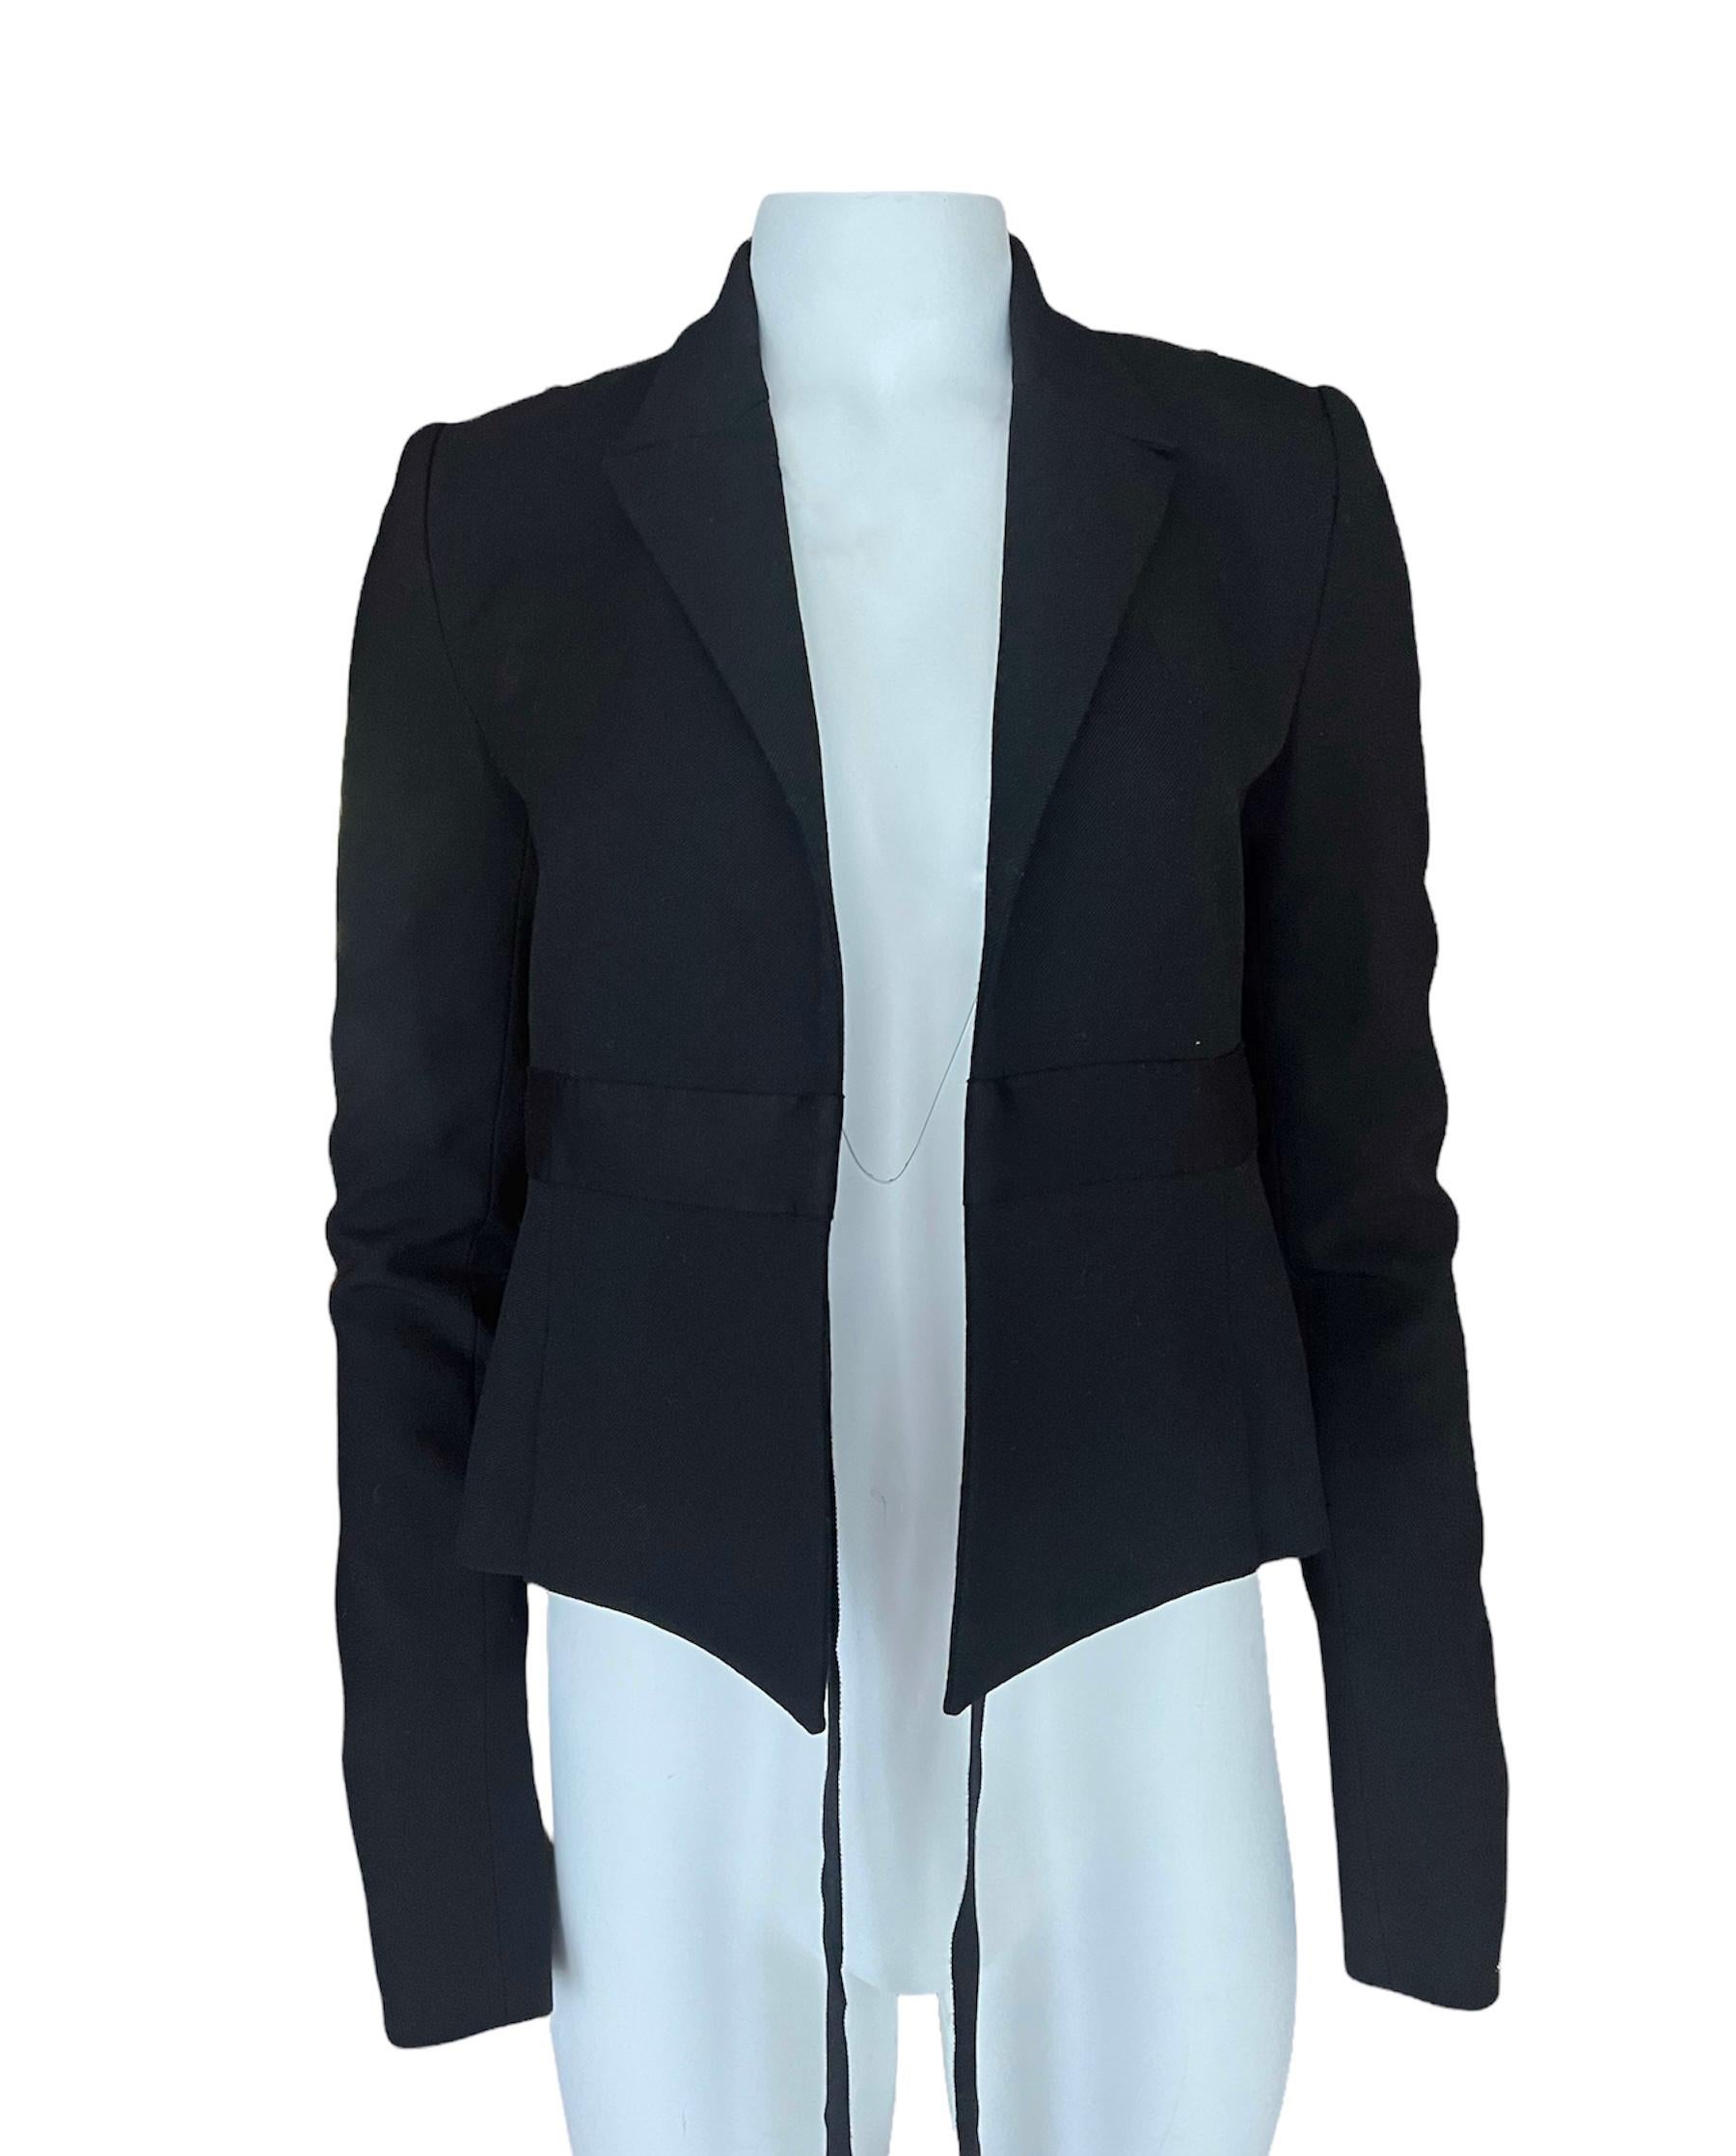 - New, with tags
- The jacket features no closure, collar, slits on the sleeves and on the back.
- Tuxedo style
- 100% wool with 100% silk lining 
- Made in USA
- Est. Retail is $2400
